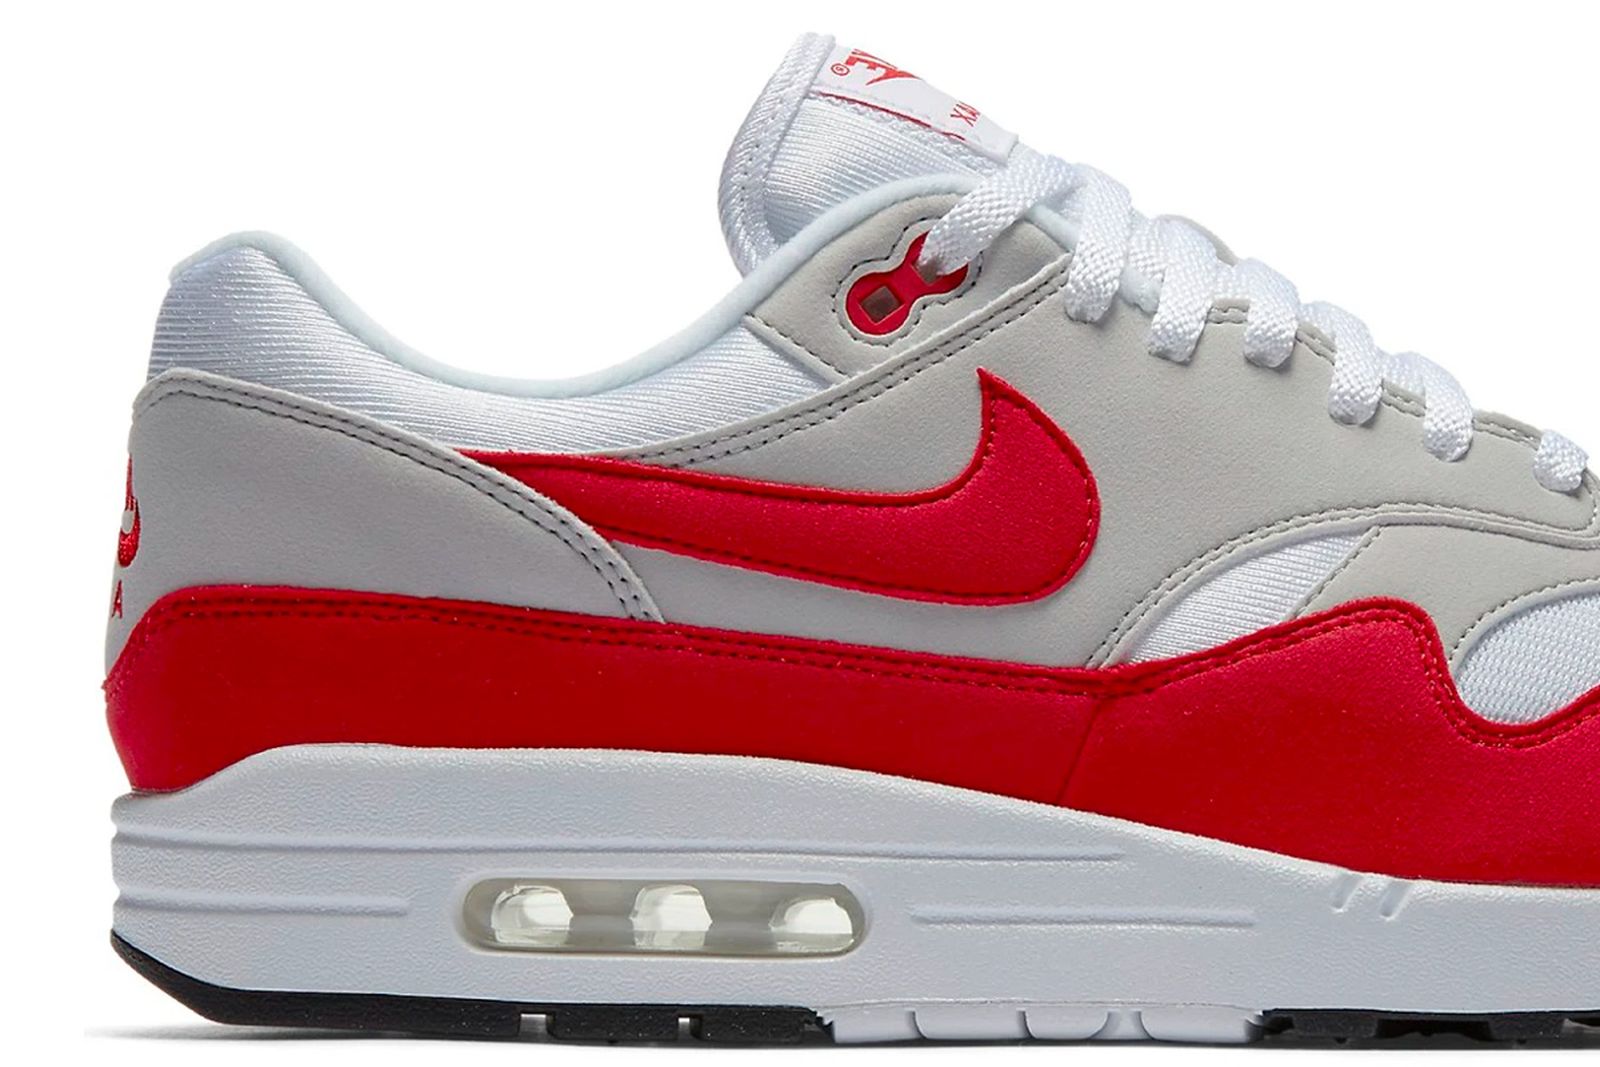 bark hydrogen Setting 11 of the Best Nike Air Max 1 Colorways to Wear in 2021